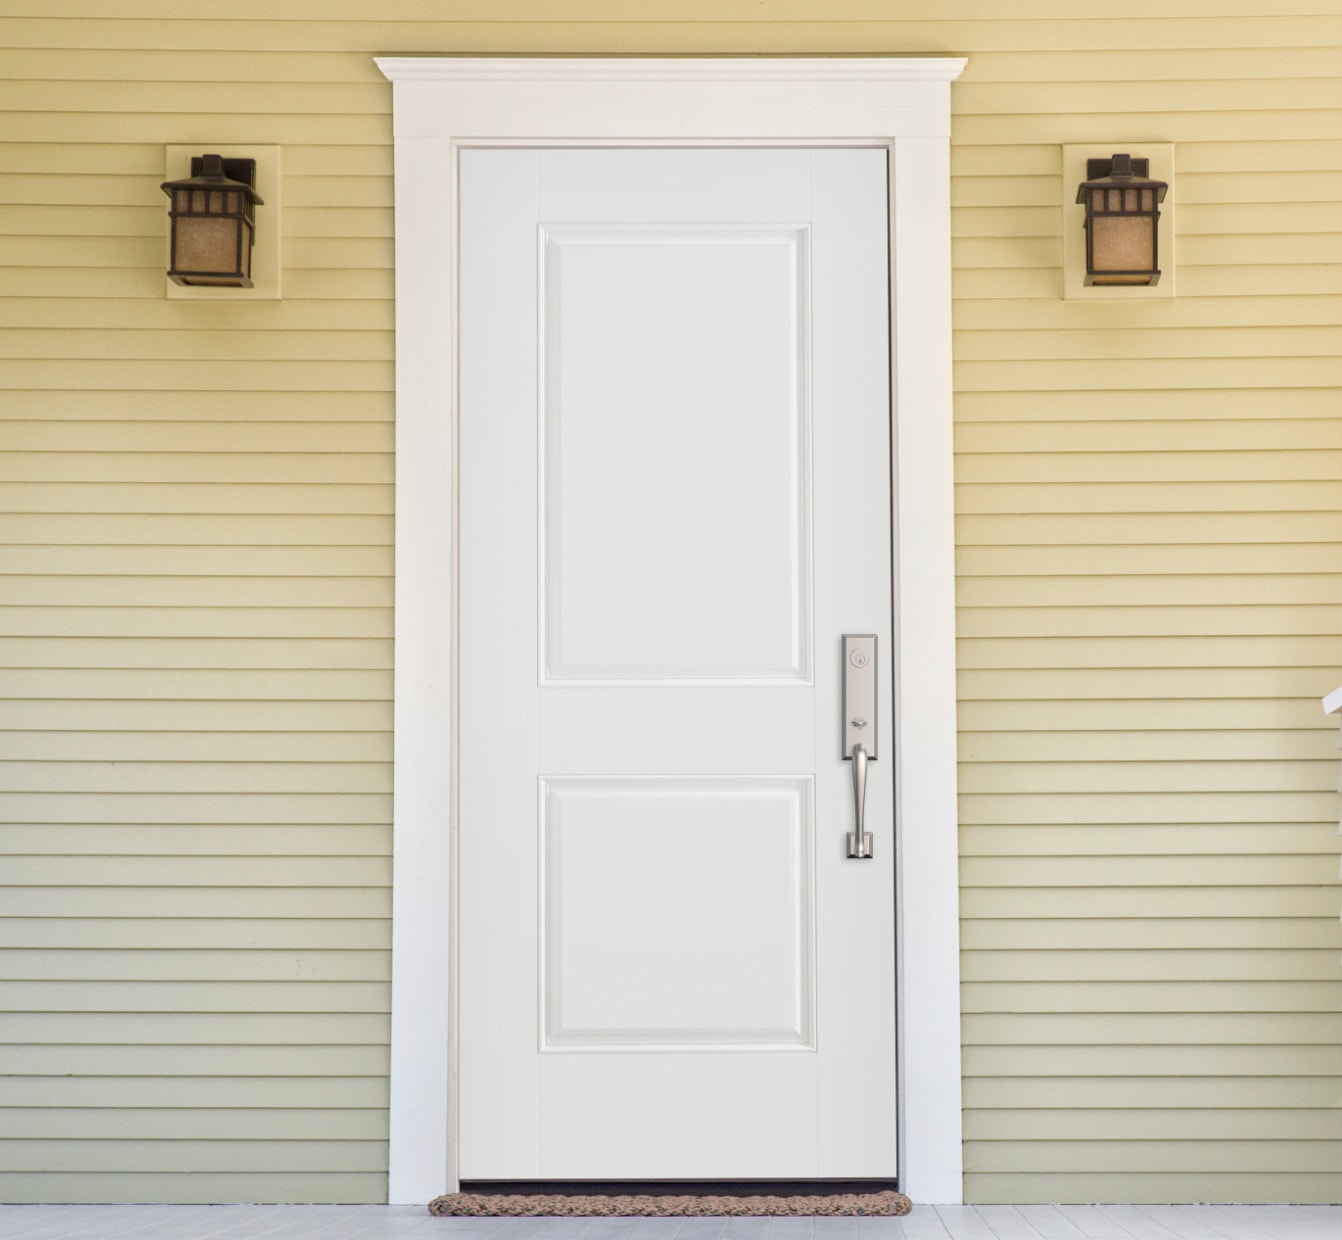 white steel entry door on a yellow exterior home with lamps on each side